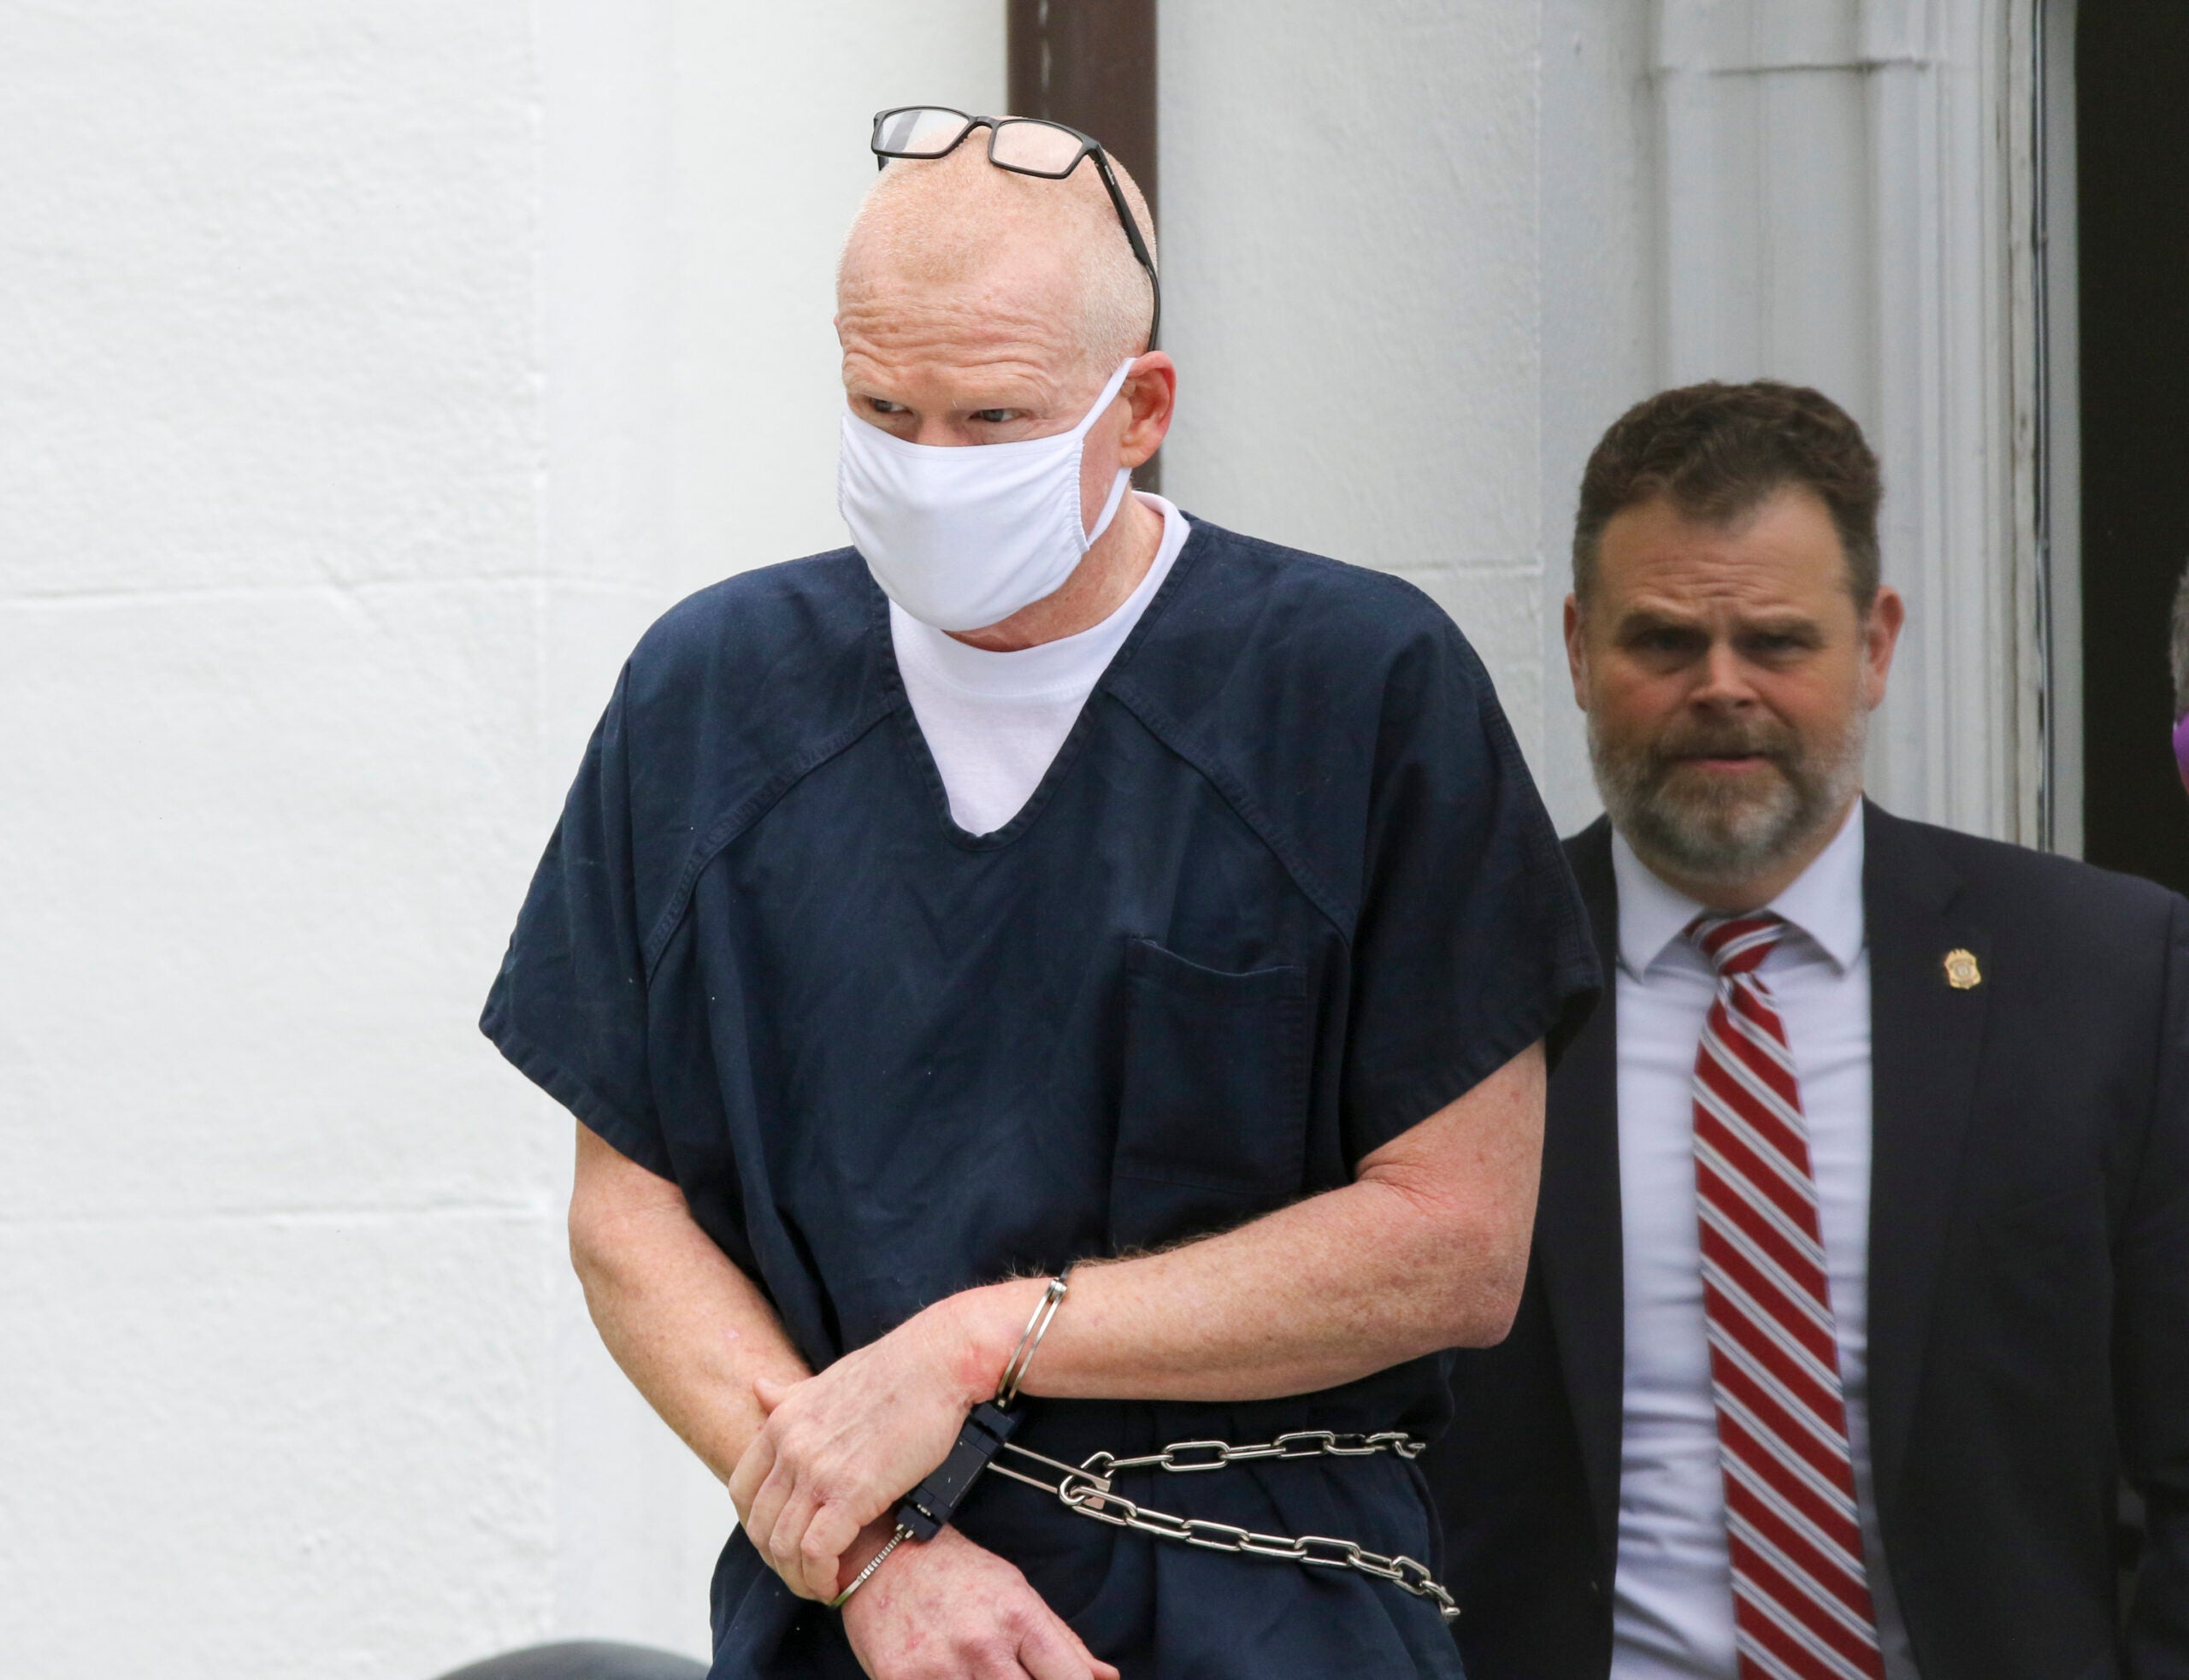 alt= Alex Murdaugh is escorted out of the Colleton County Courthouse in Walterboro, S.C., on July 20, 2022. Murdaugh's trial on two counts of murder in the June 2021 deaths of his wife and son is scheduled to start Monday, Jan. 23, 2023.